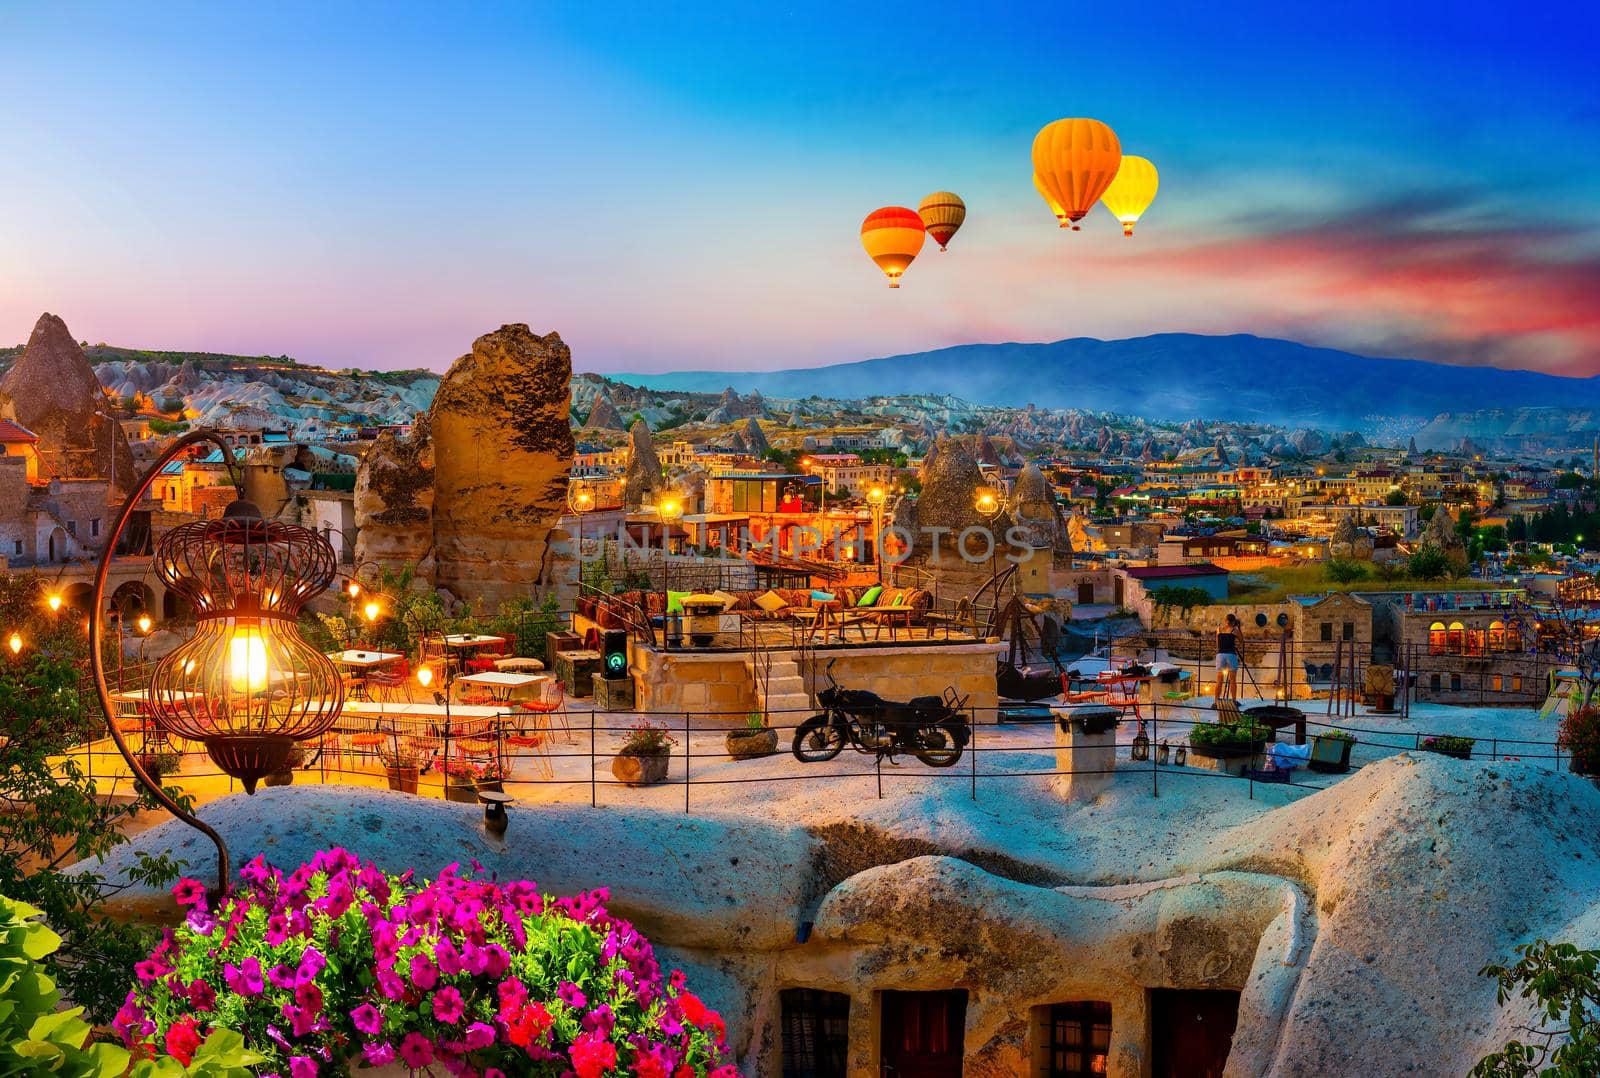 Balloons at sunrise in Turkey by Givaga